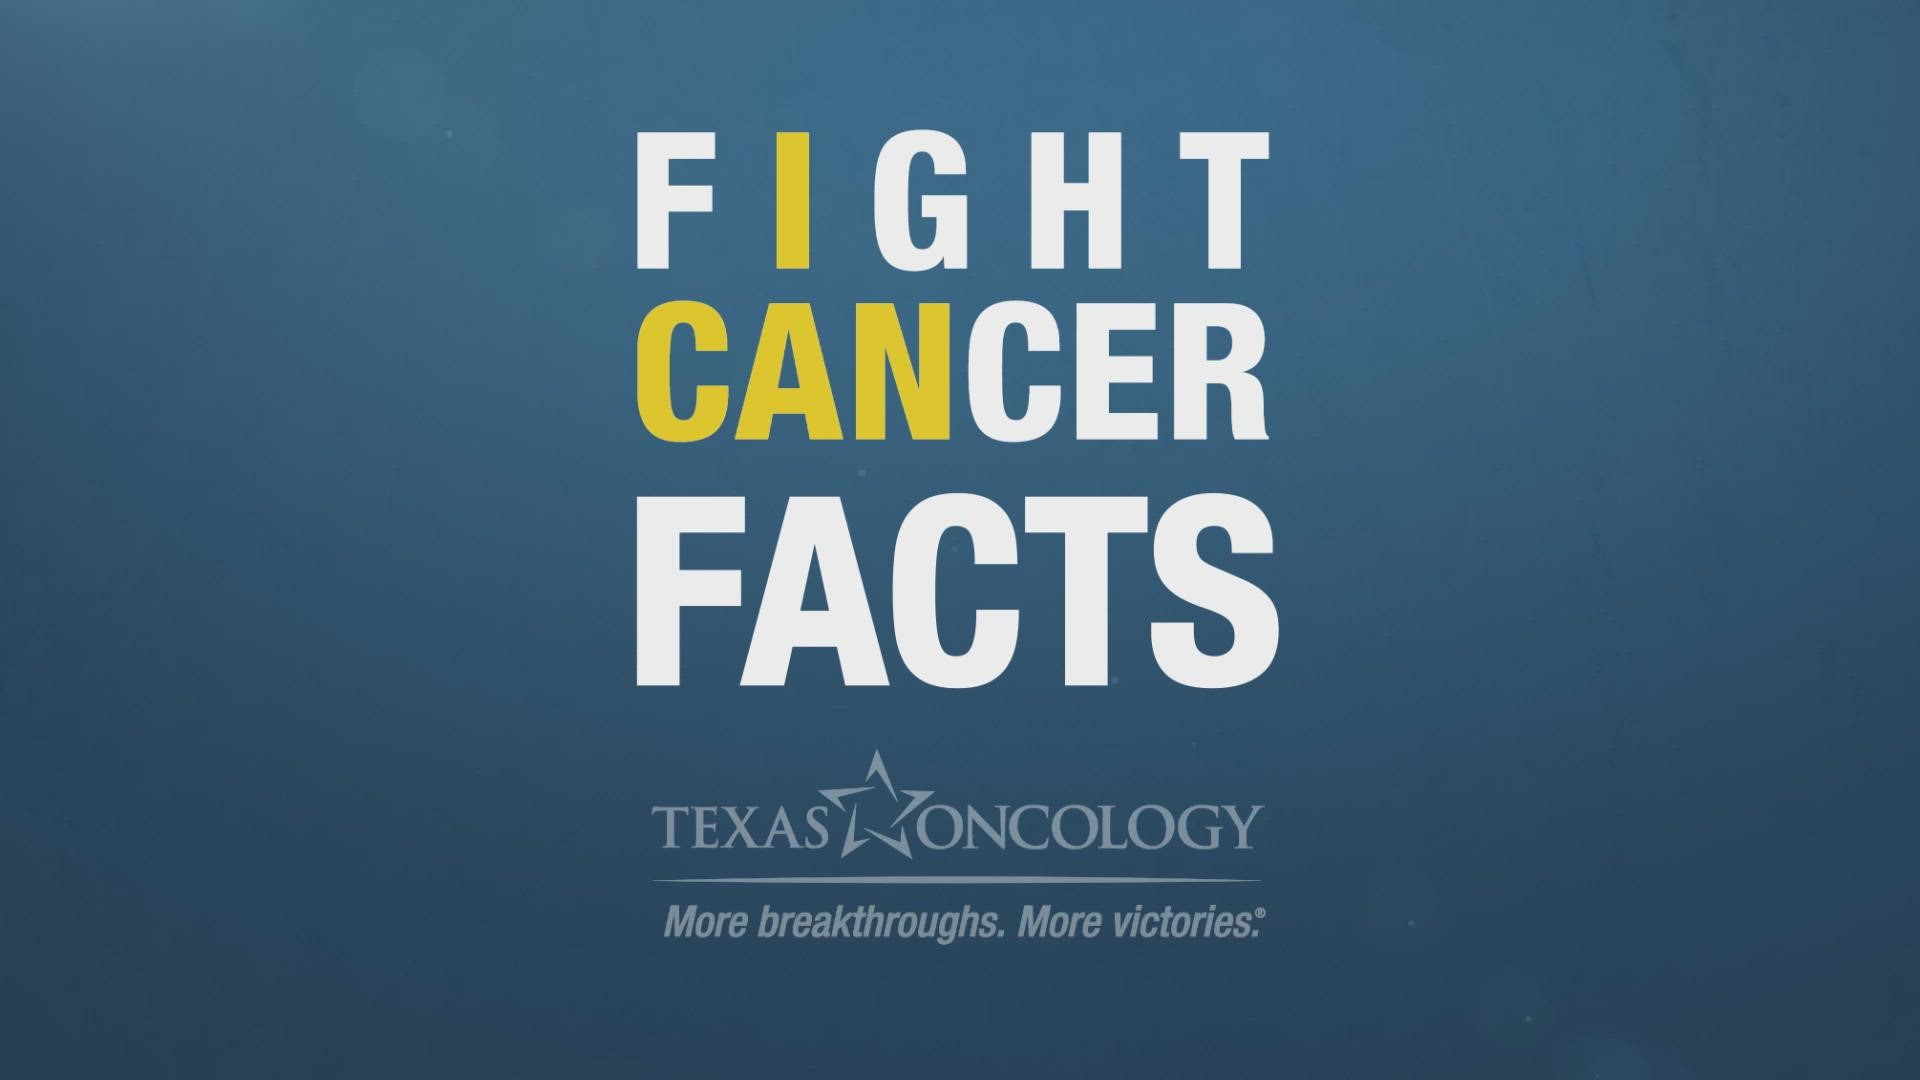 Local Texas Oncology doctor discusses the importance of clinical trials in paving the way for new breakthroughs in cancer care.